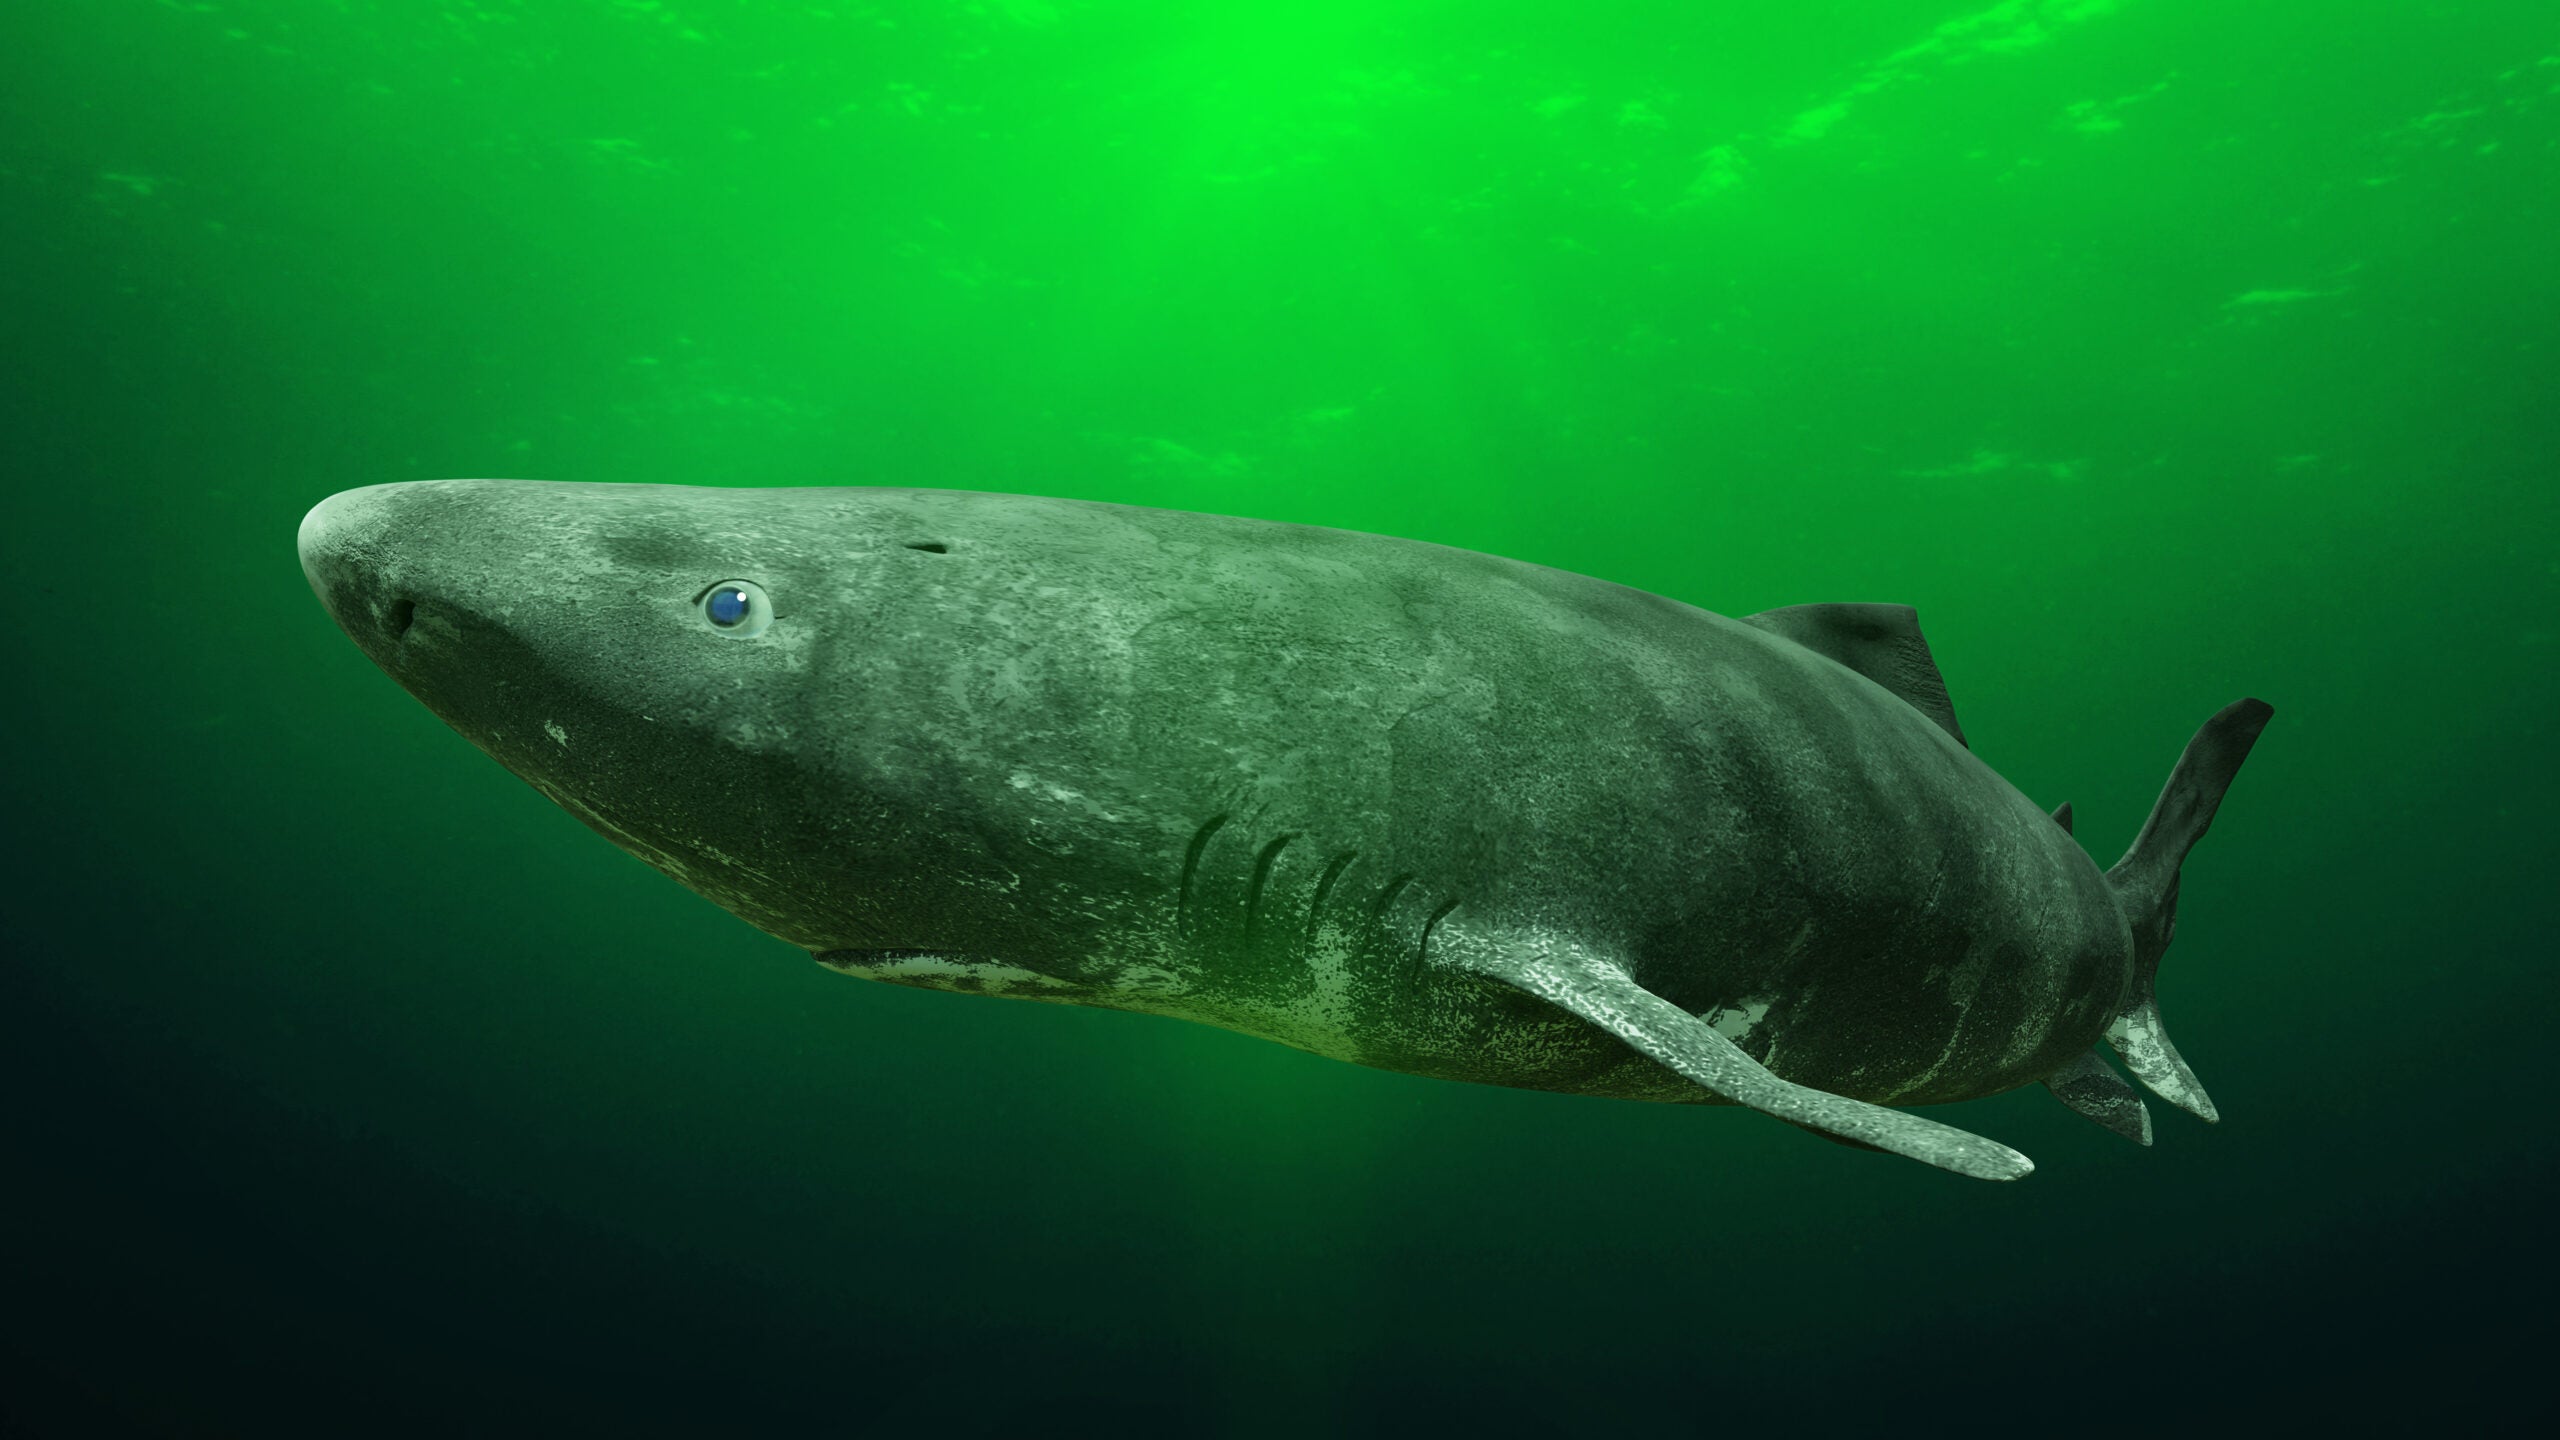 photo of a Greenland shark which can live up to 500 years